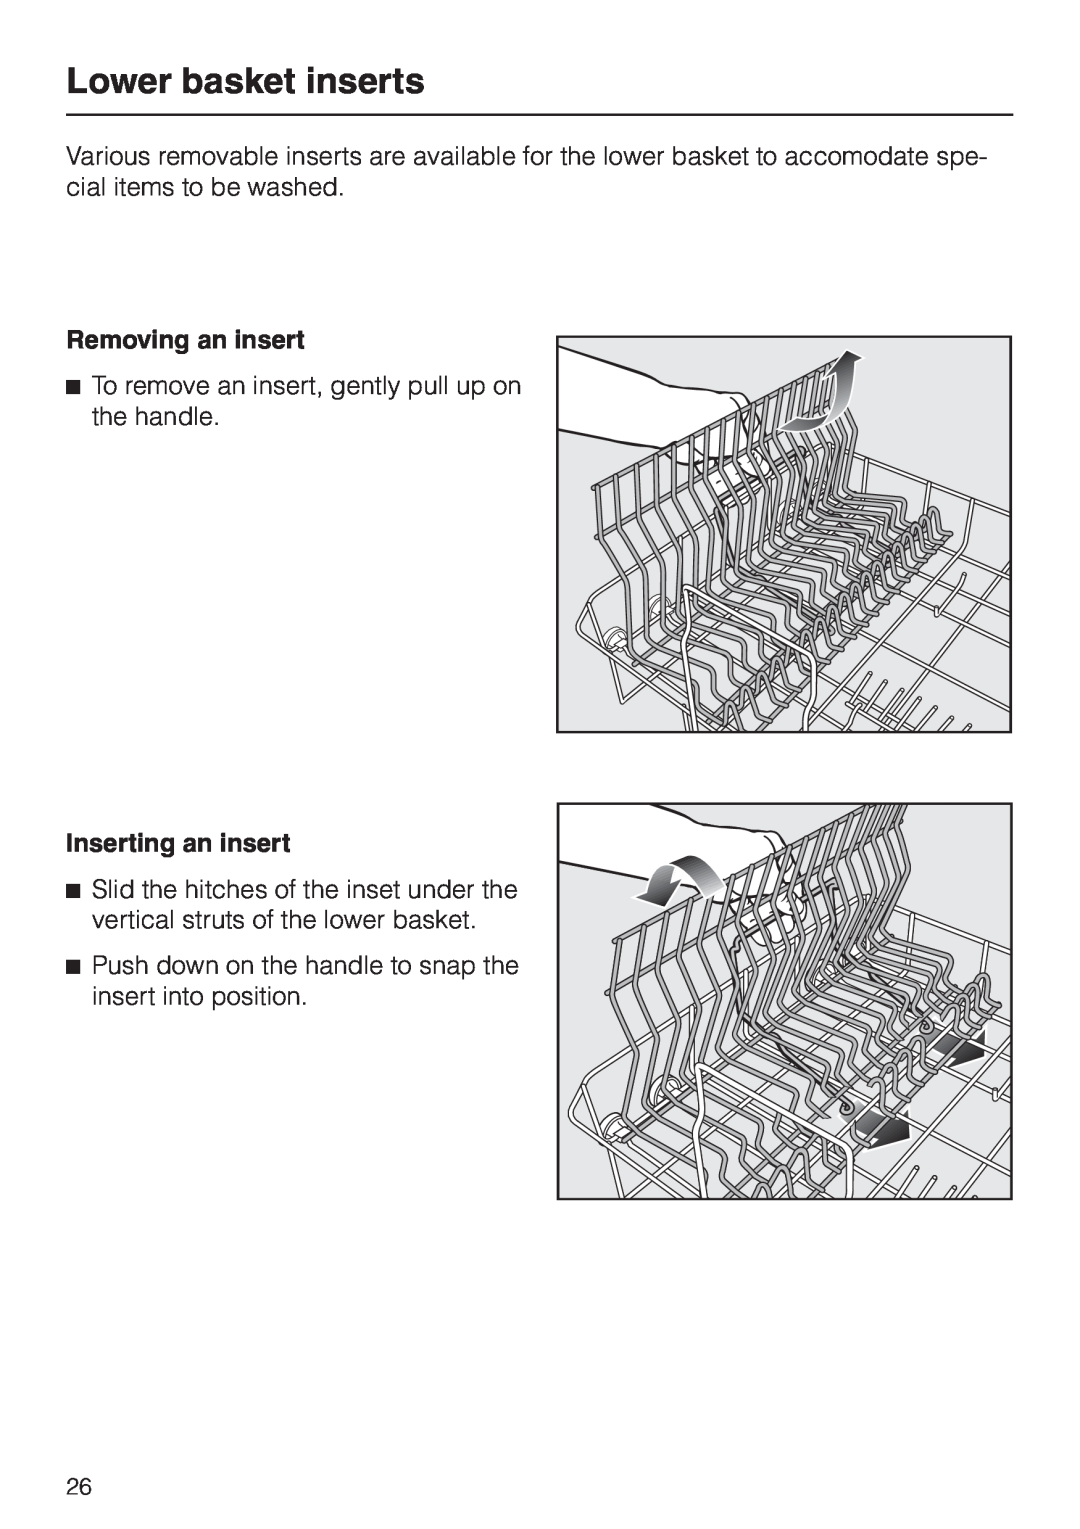 Miele G 856 SC ELITE operating instructions Lower basket inserts, Removing an insert, Inserting an insert 